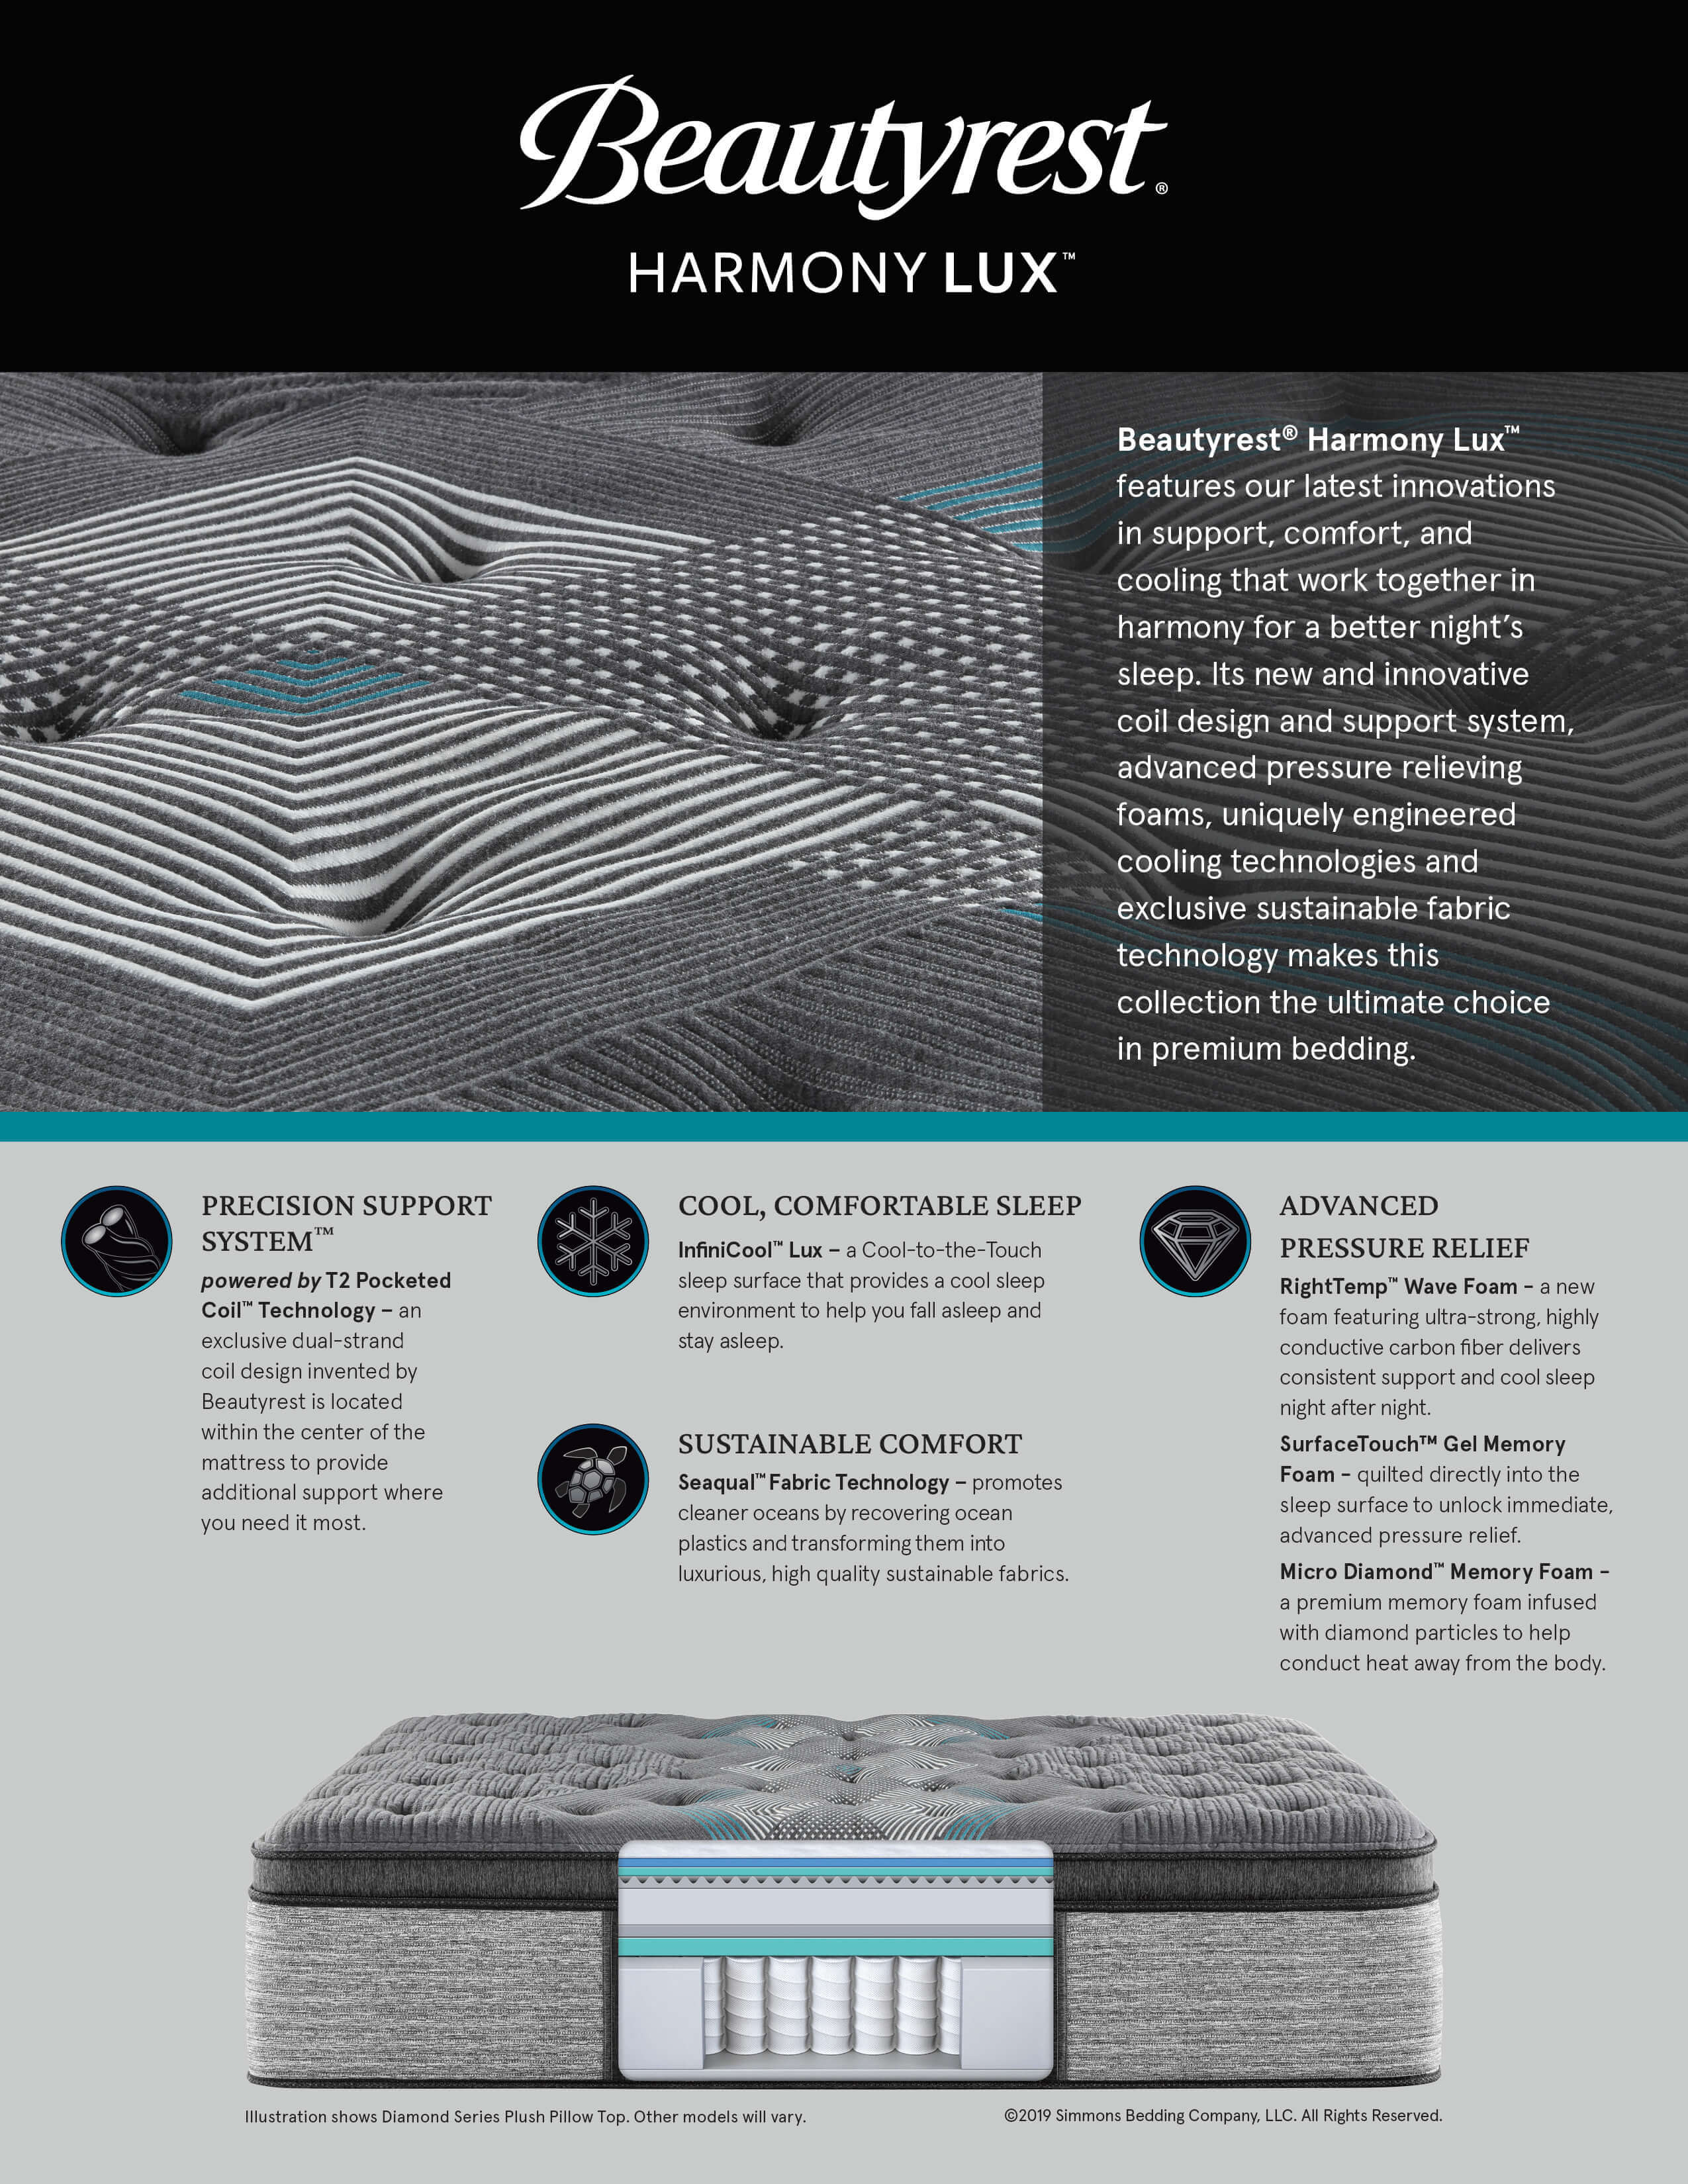 Beautyrest Harmony Lux Bed